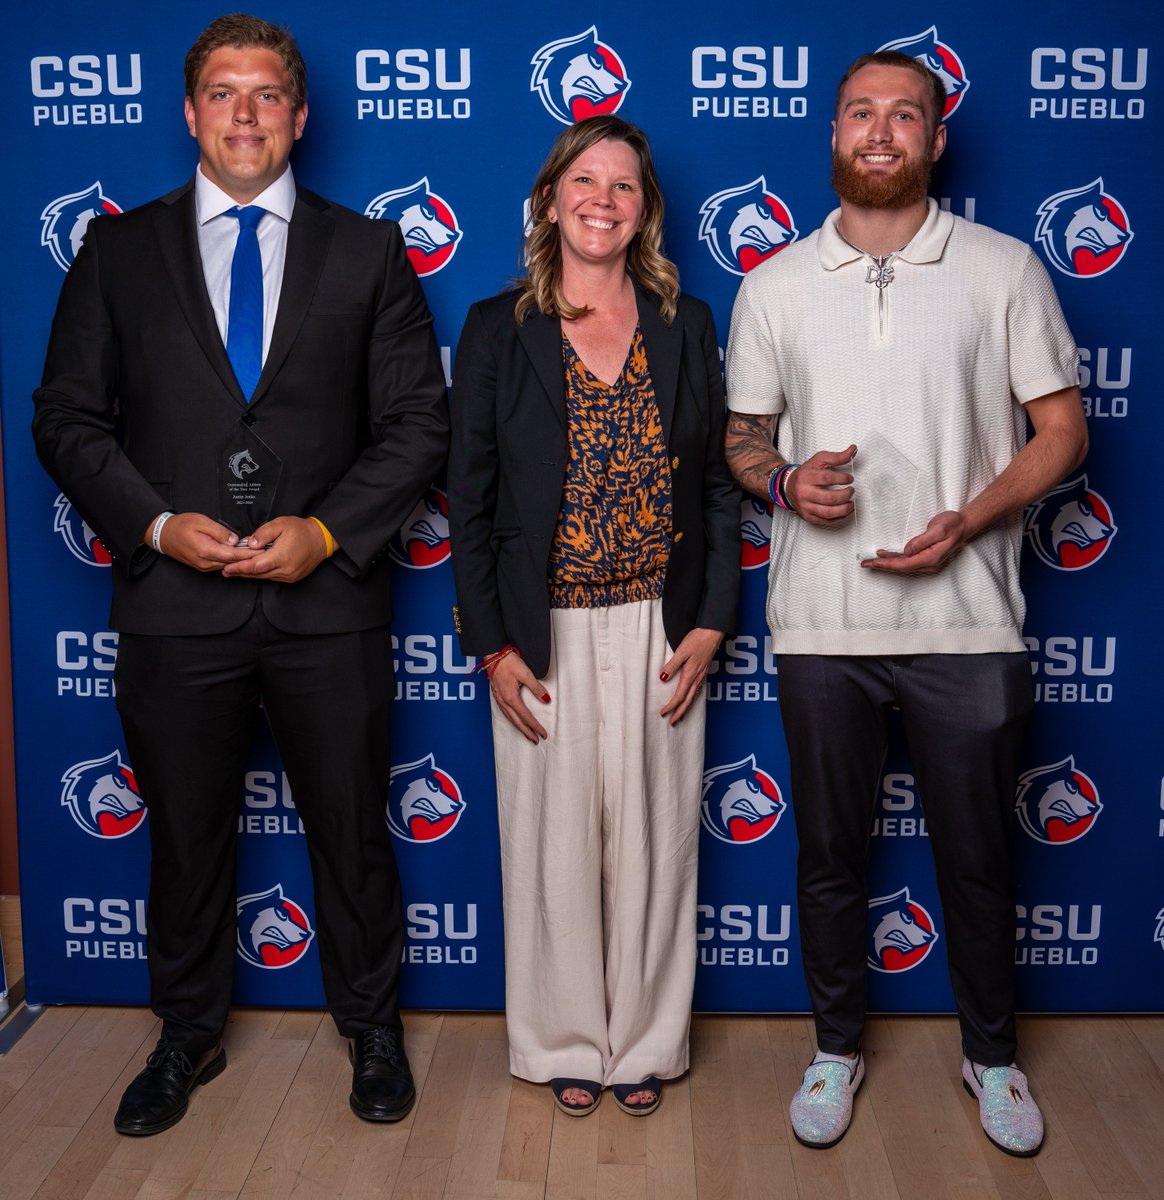 On Tuesday, we held our annual Wolfies Student-Athlete Banquet Check out the full gallery and some of the top moments ➡️bit.ly/4b5q98X 📷: Bill Sabo & Jayson Ortiz Special Thanks to President Valdez and cabinet for joining us. #DevelopingChampions #ThePackWay